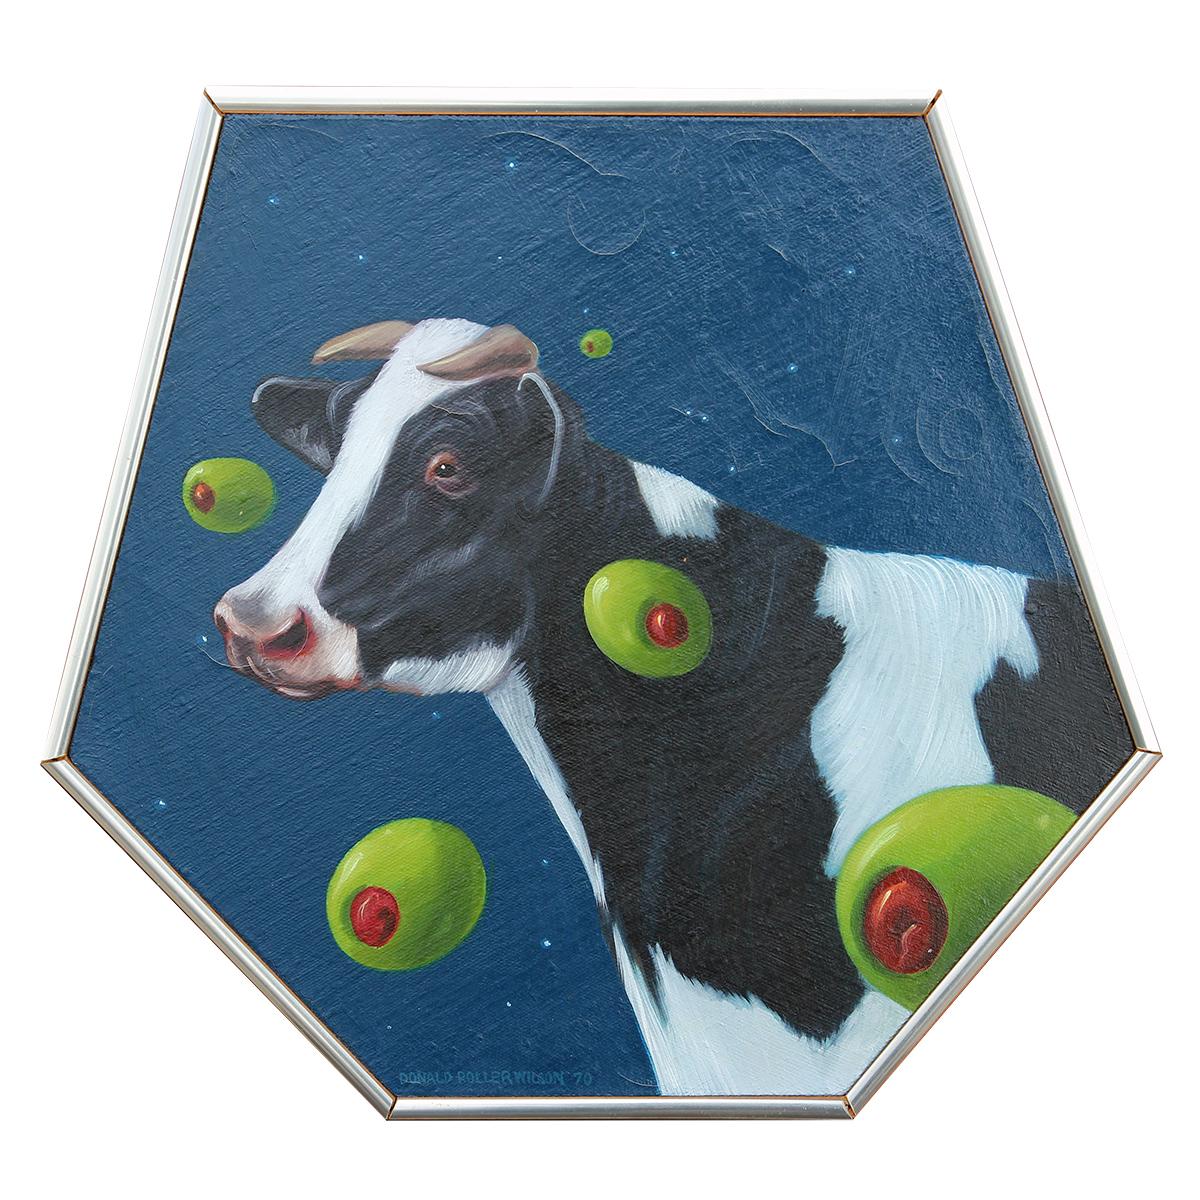 Donald Roller Wilson Animal Painting - “Space Friends: Barn Trip” Modern Hyperrealist Cow & Olives Surrealist Painting